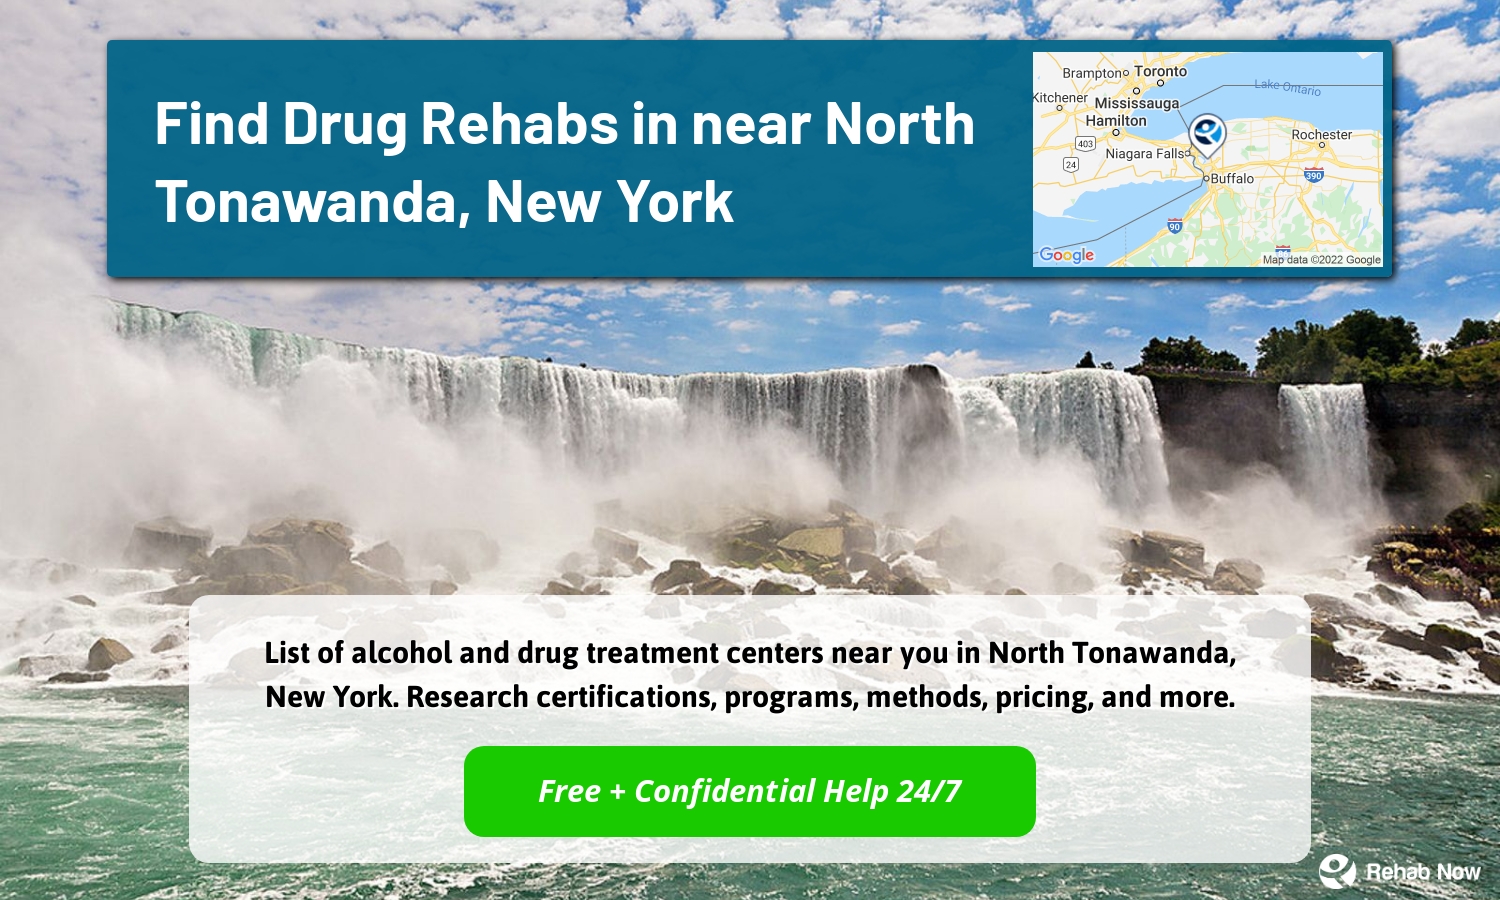 List of alcohol and drug treatment centers near you in North Tonawanda, New York. Research certifications, programs, methods, pricing, and more.